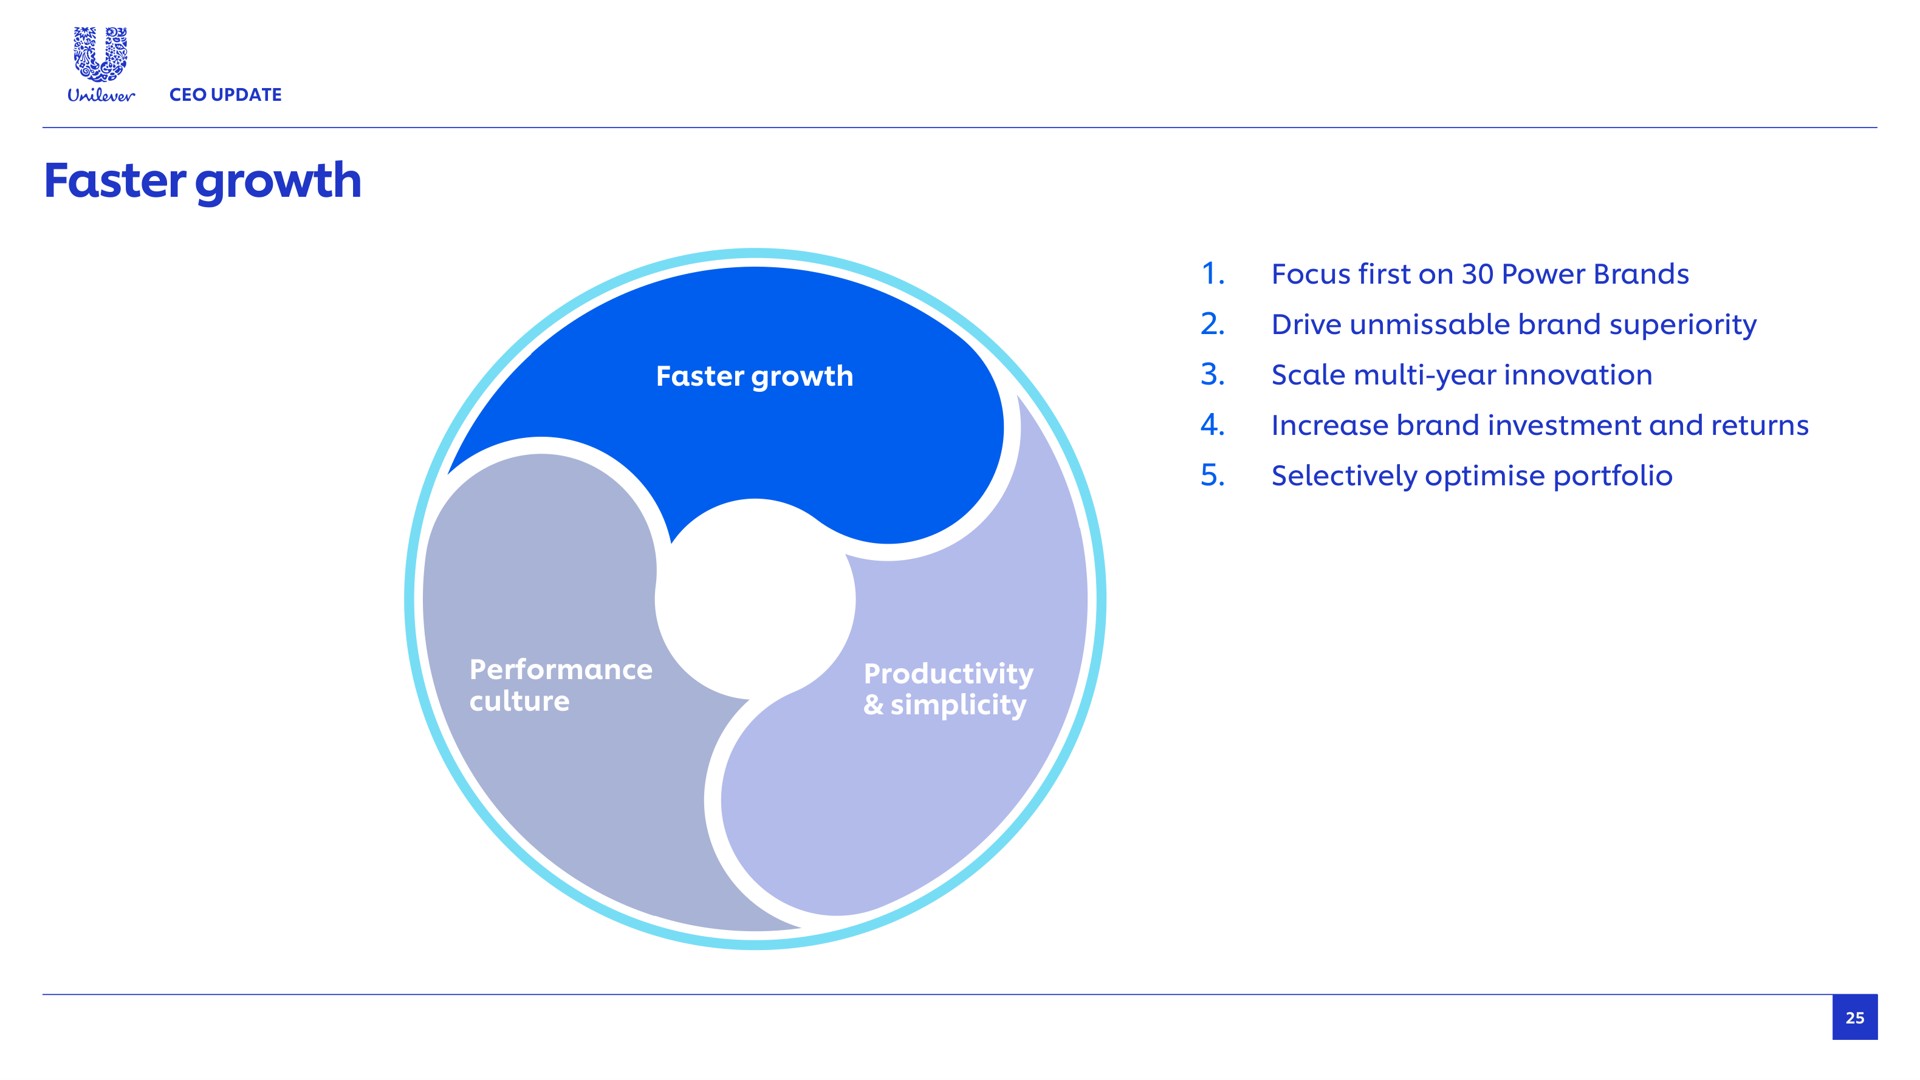 faster growth focus first on power brands drive unmissable brand superiority scale year innovation increase brand investment and returns selectively portfolio productivity performance culture simplicity | Unilever